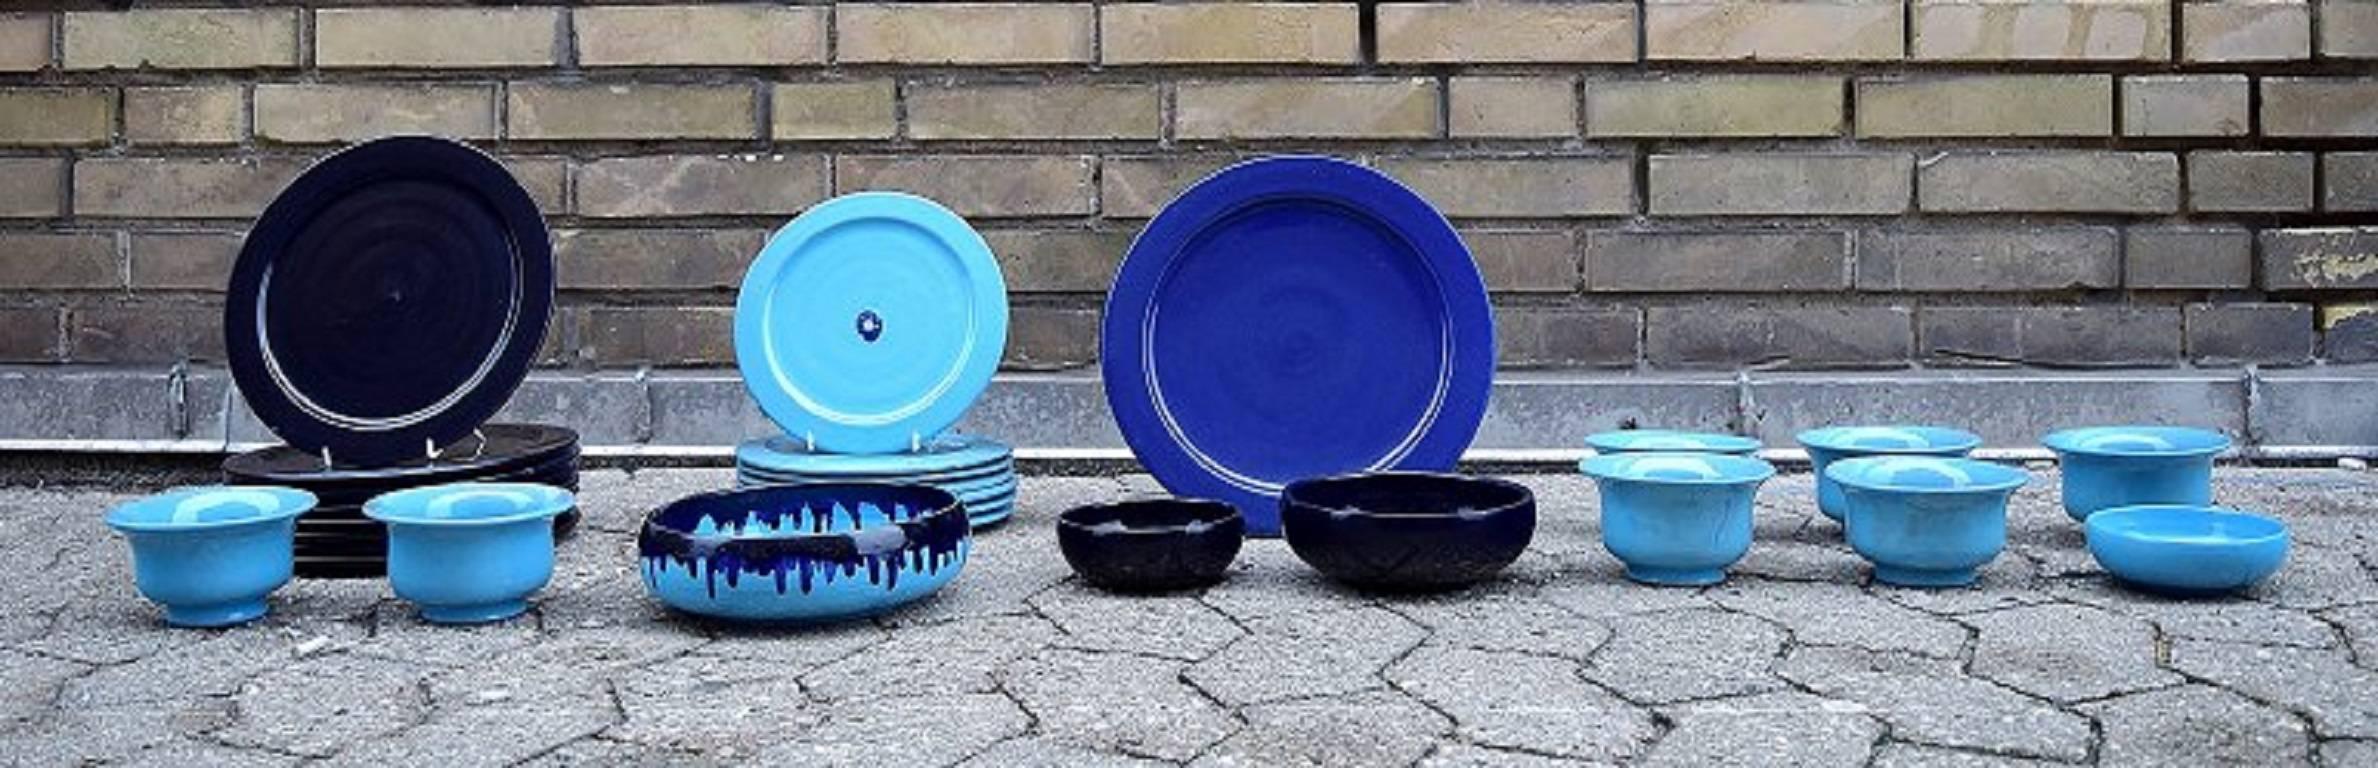 Bjorn Wiinblad 'Boheme' service of glazed earthenware decorated in blue colors, consisting of eight dinner plates 25 cm, 7 lunch plates 21 cm, 7 bowls 12,5 cm, dish diameter 29 cm. Four bowls.

Own workshop, 27 pieces dinner service.

Rare